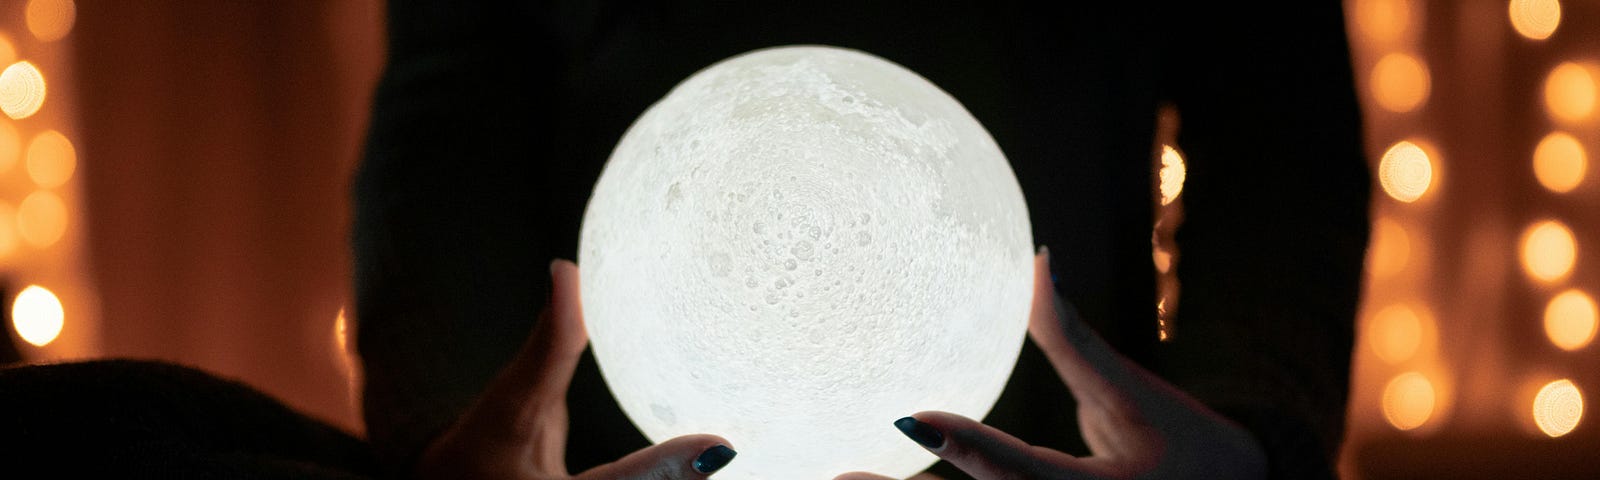 A woman’s dark, shadowy figure sits, holding a white crystal ball that looks like a little moon in her hands. It’s a body shot; you can’t see her head. Orange, brownish lights twinkle in the background.